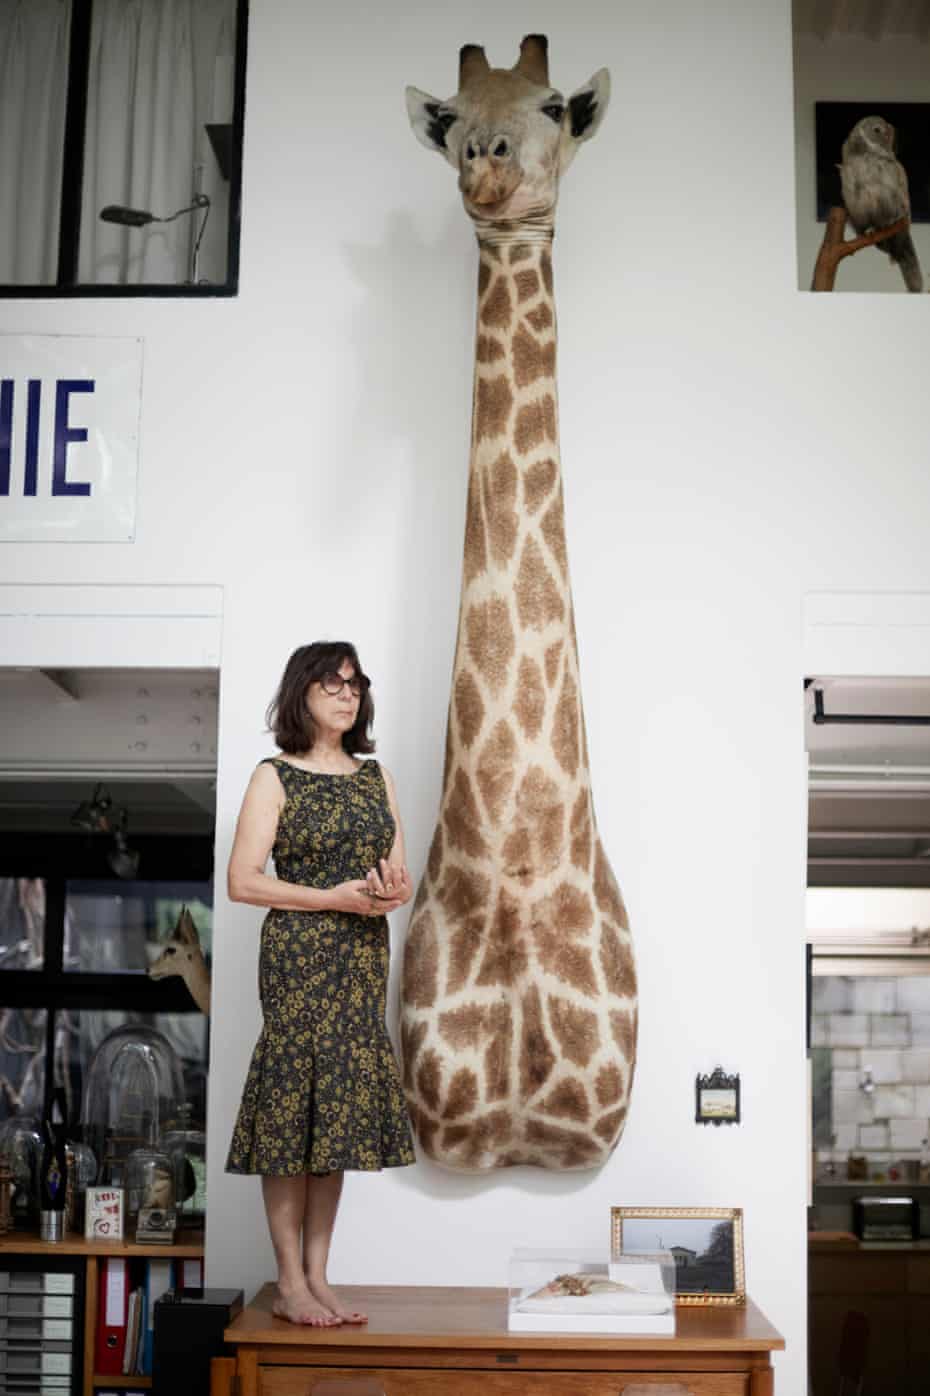 Sophie Calle standing barefoot on a desk in her home next to a stuffed giraffe's head on the wall